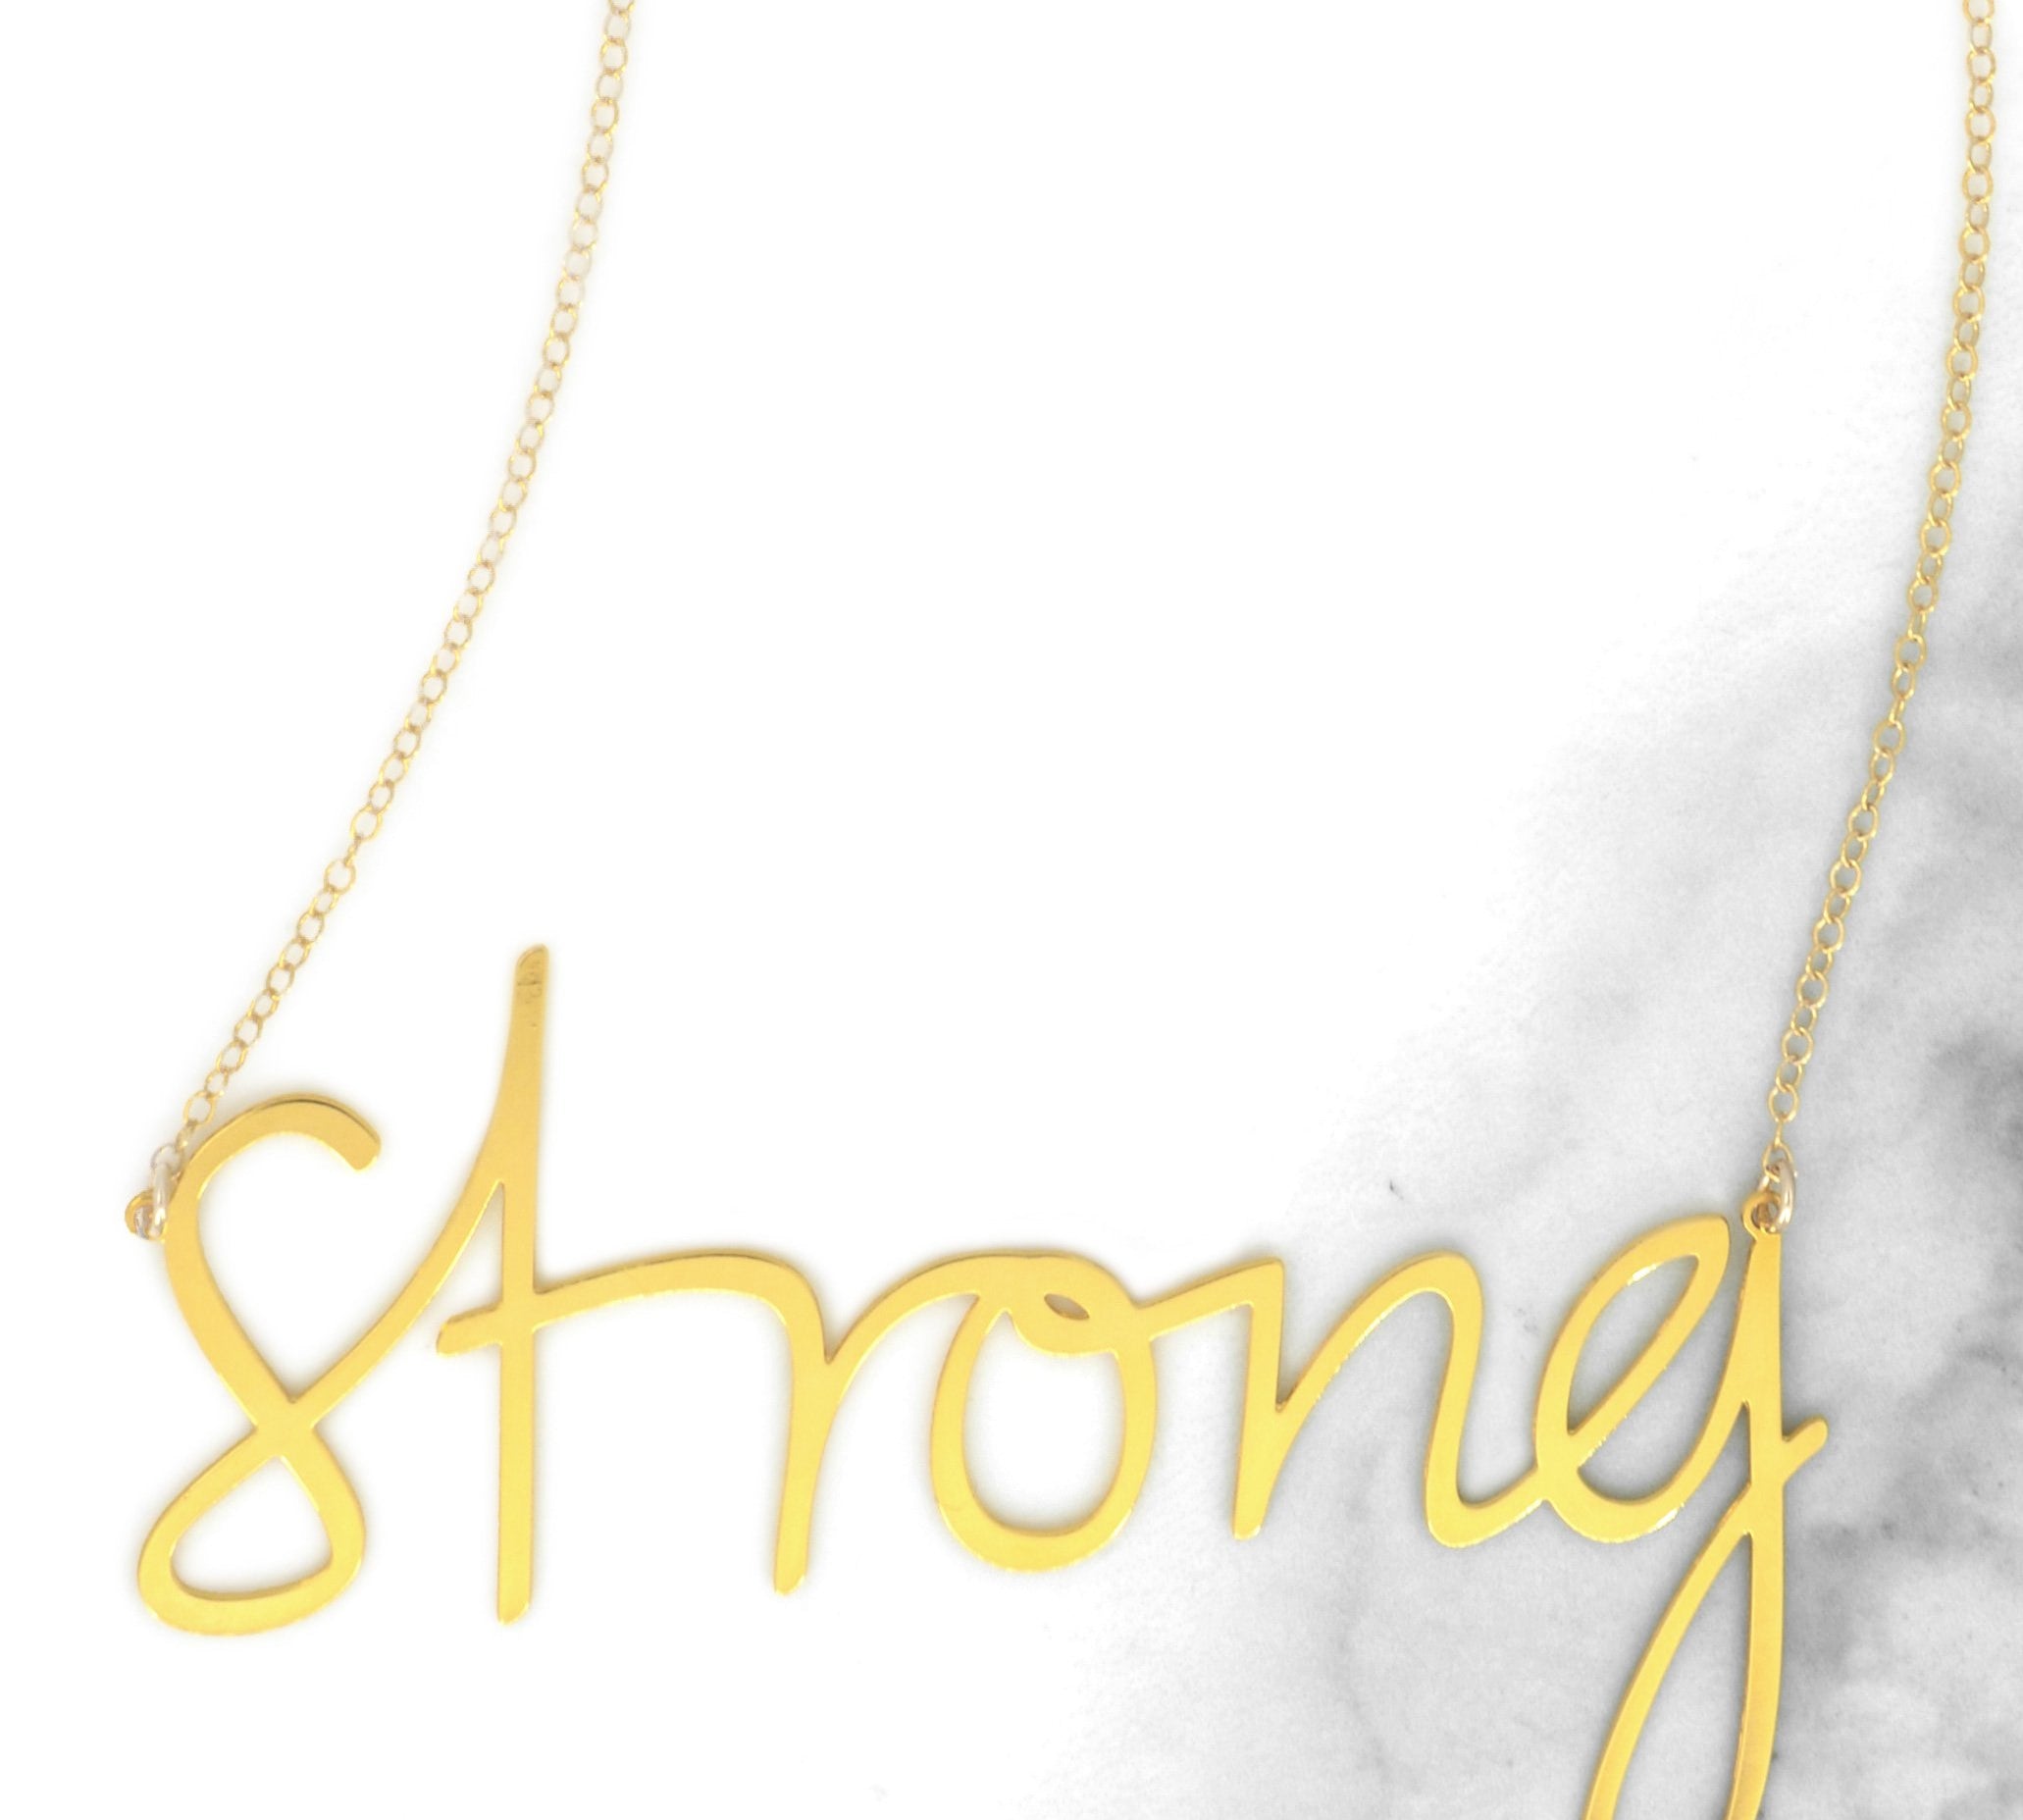 Strong Necklace - High Quality, Affordable, Hand Written, Empowering, Self Love, Mantra Word Necklace - Available in Gold and Silver - Small and Large Sizes - Made in USA - Brevity Jewelry